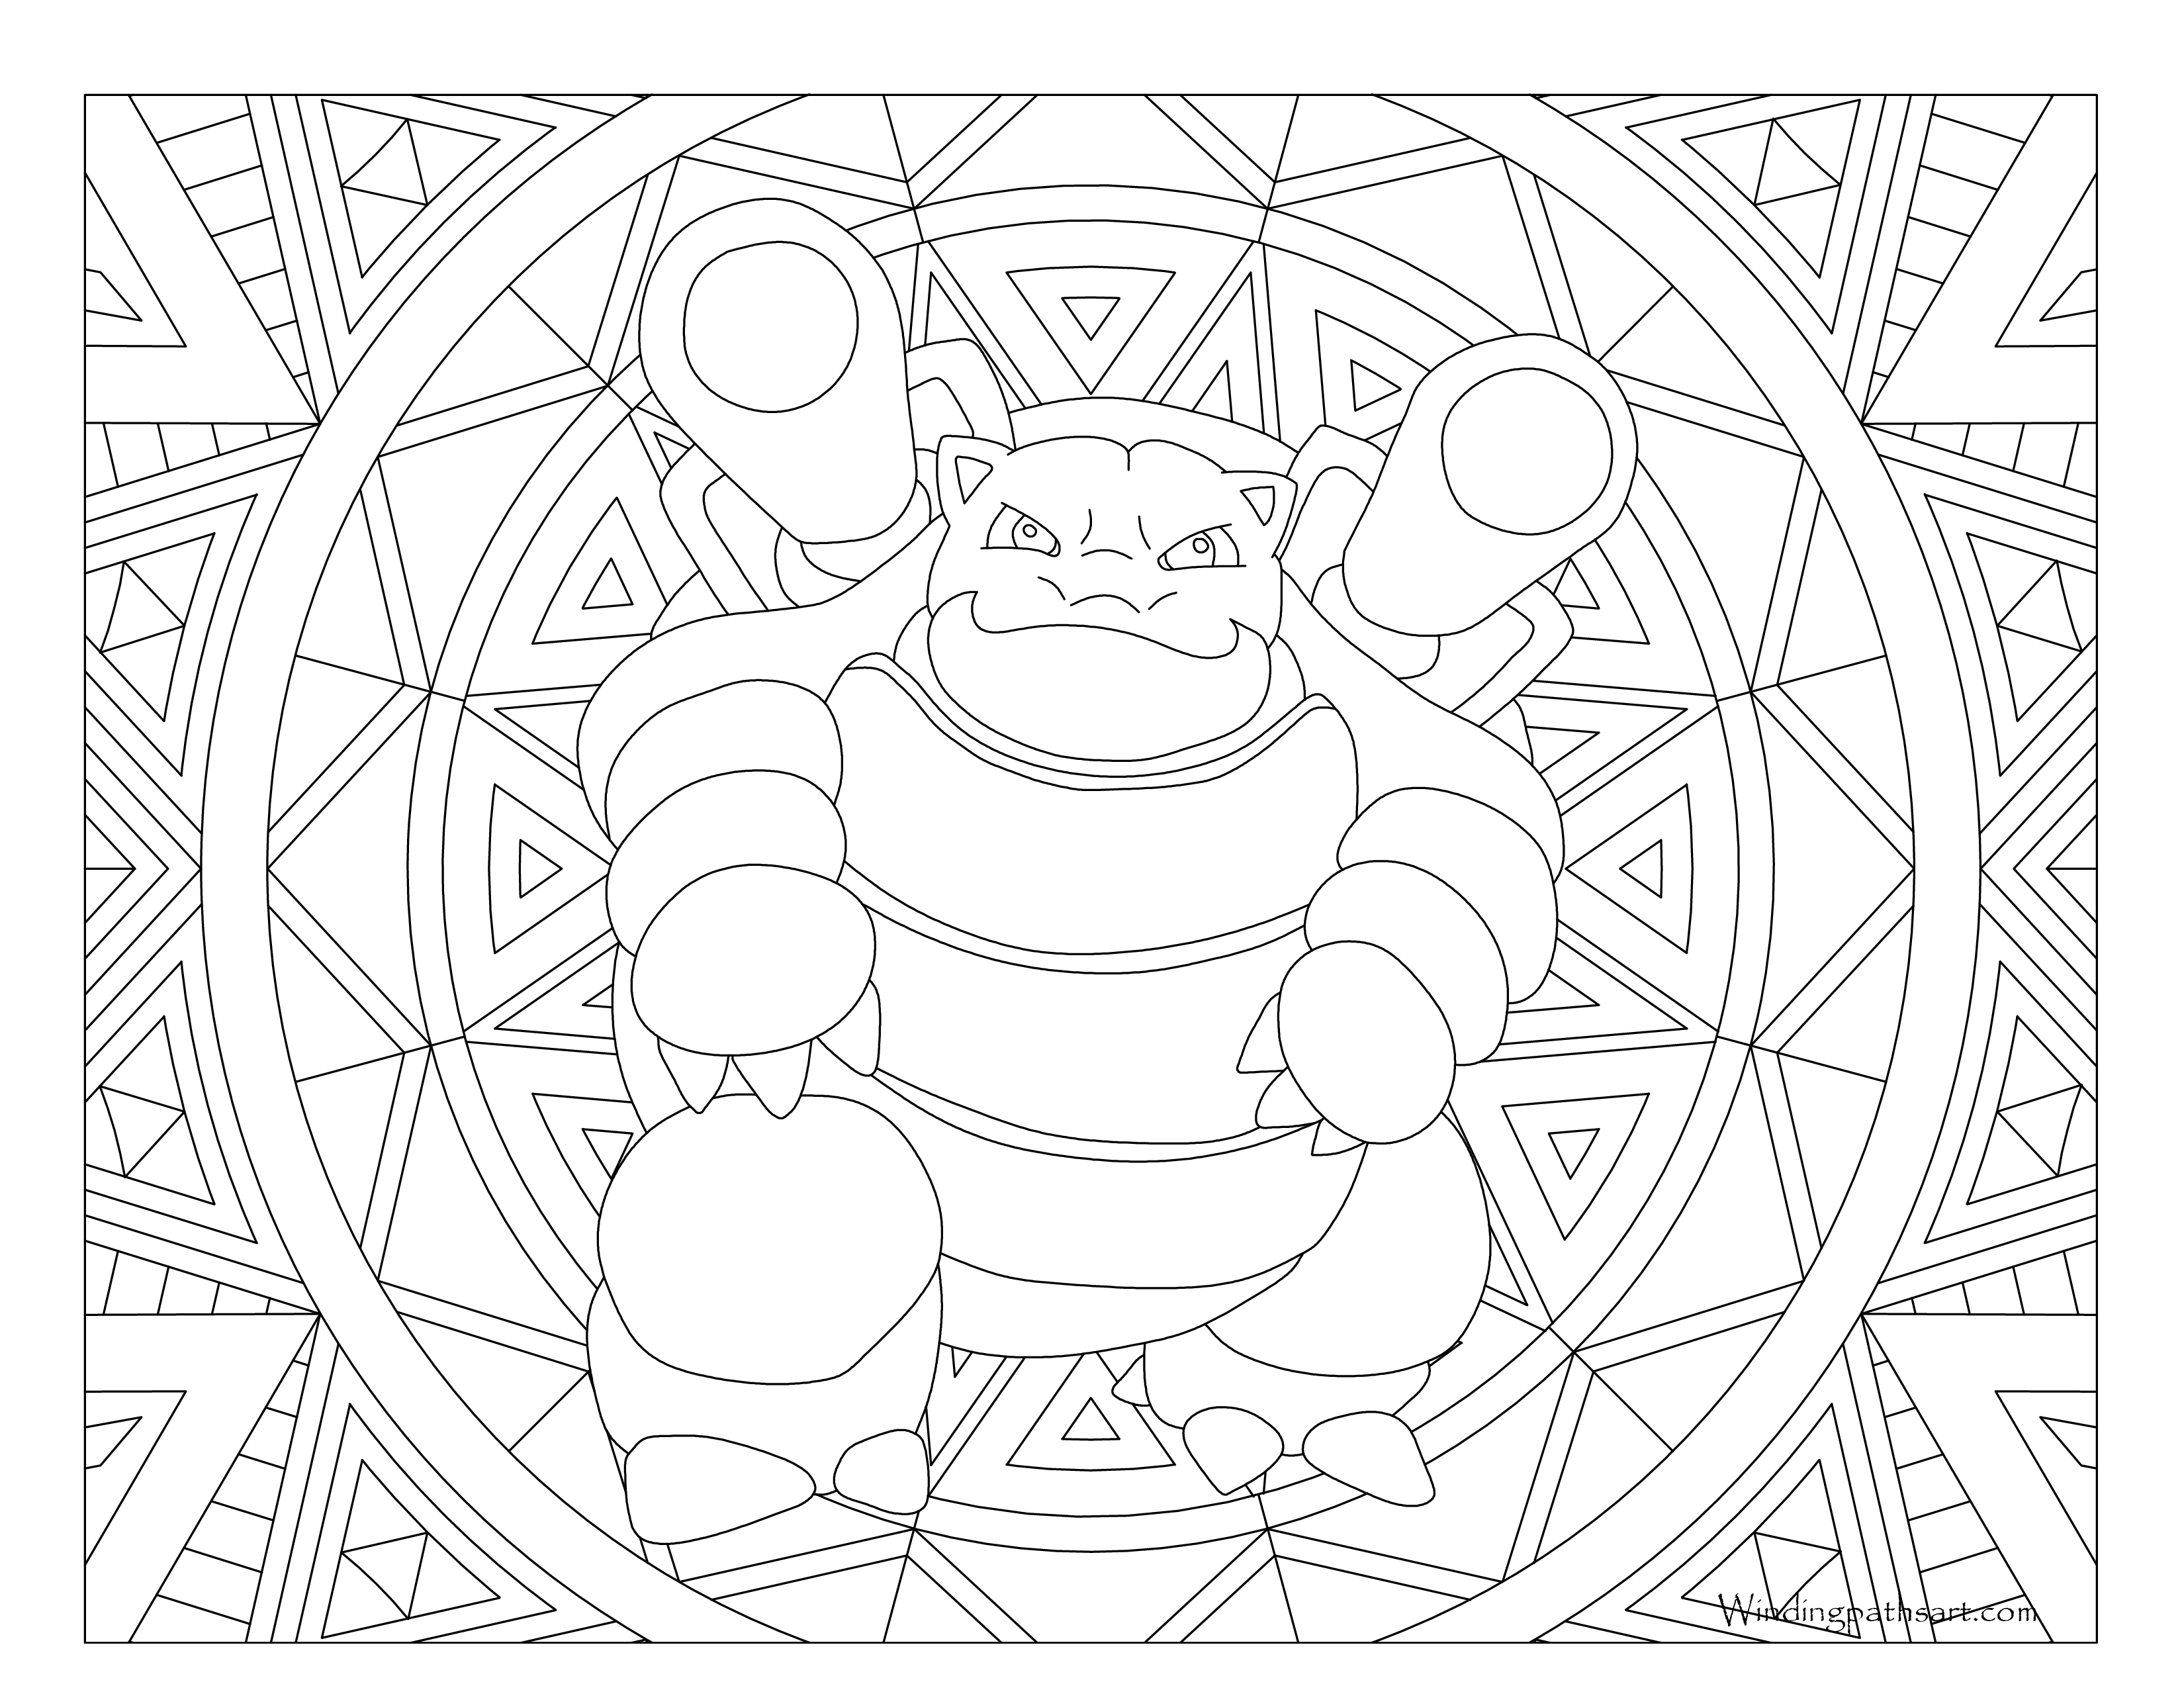 keys clipart colouring page